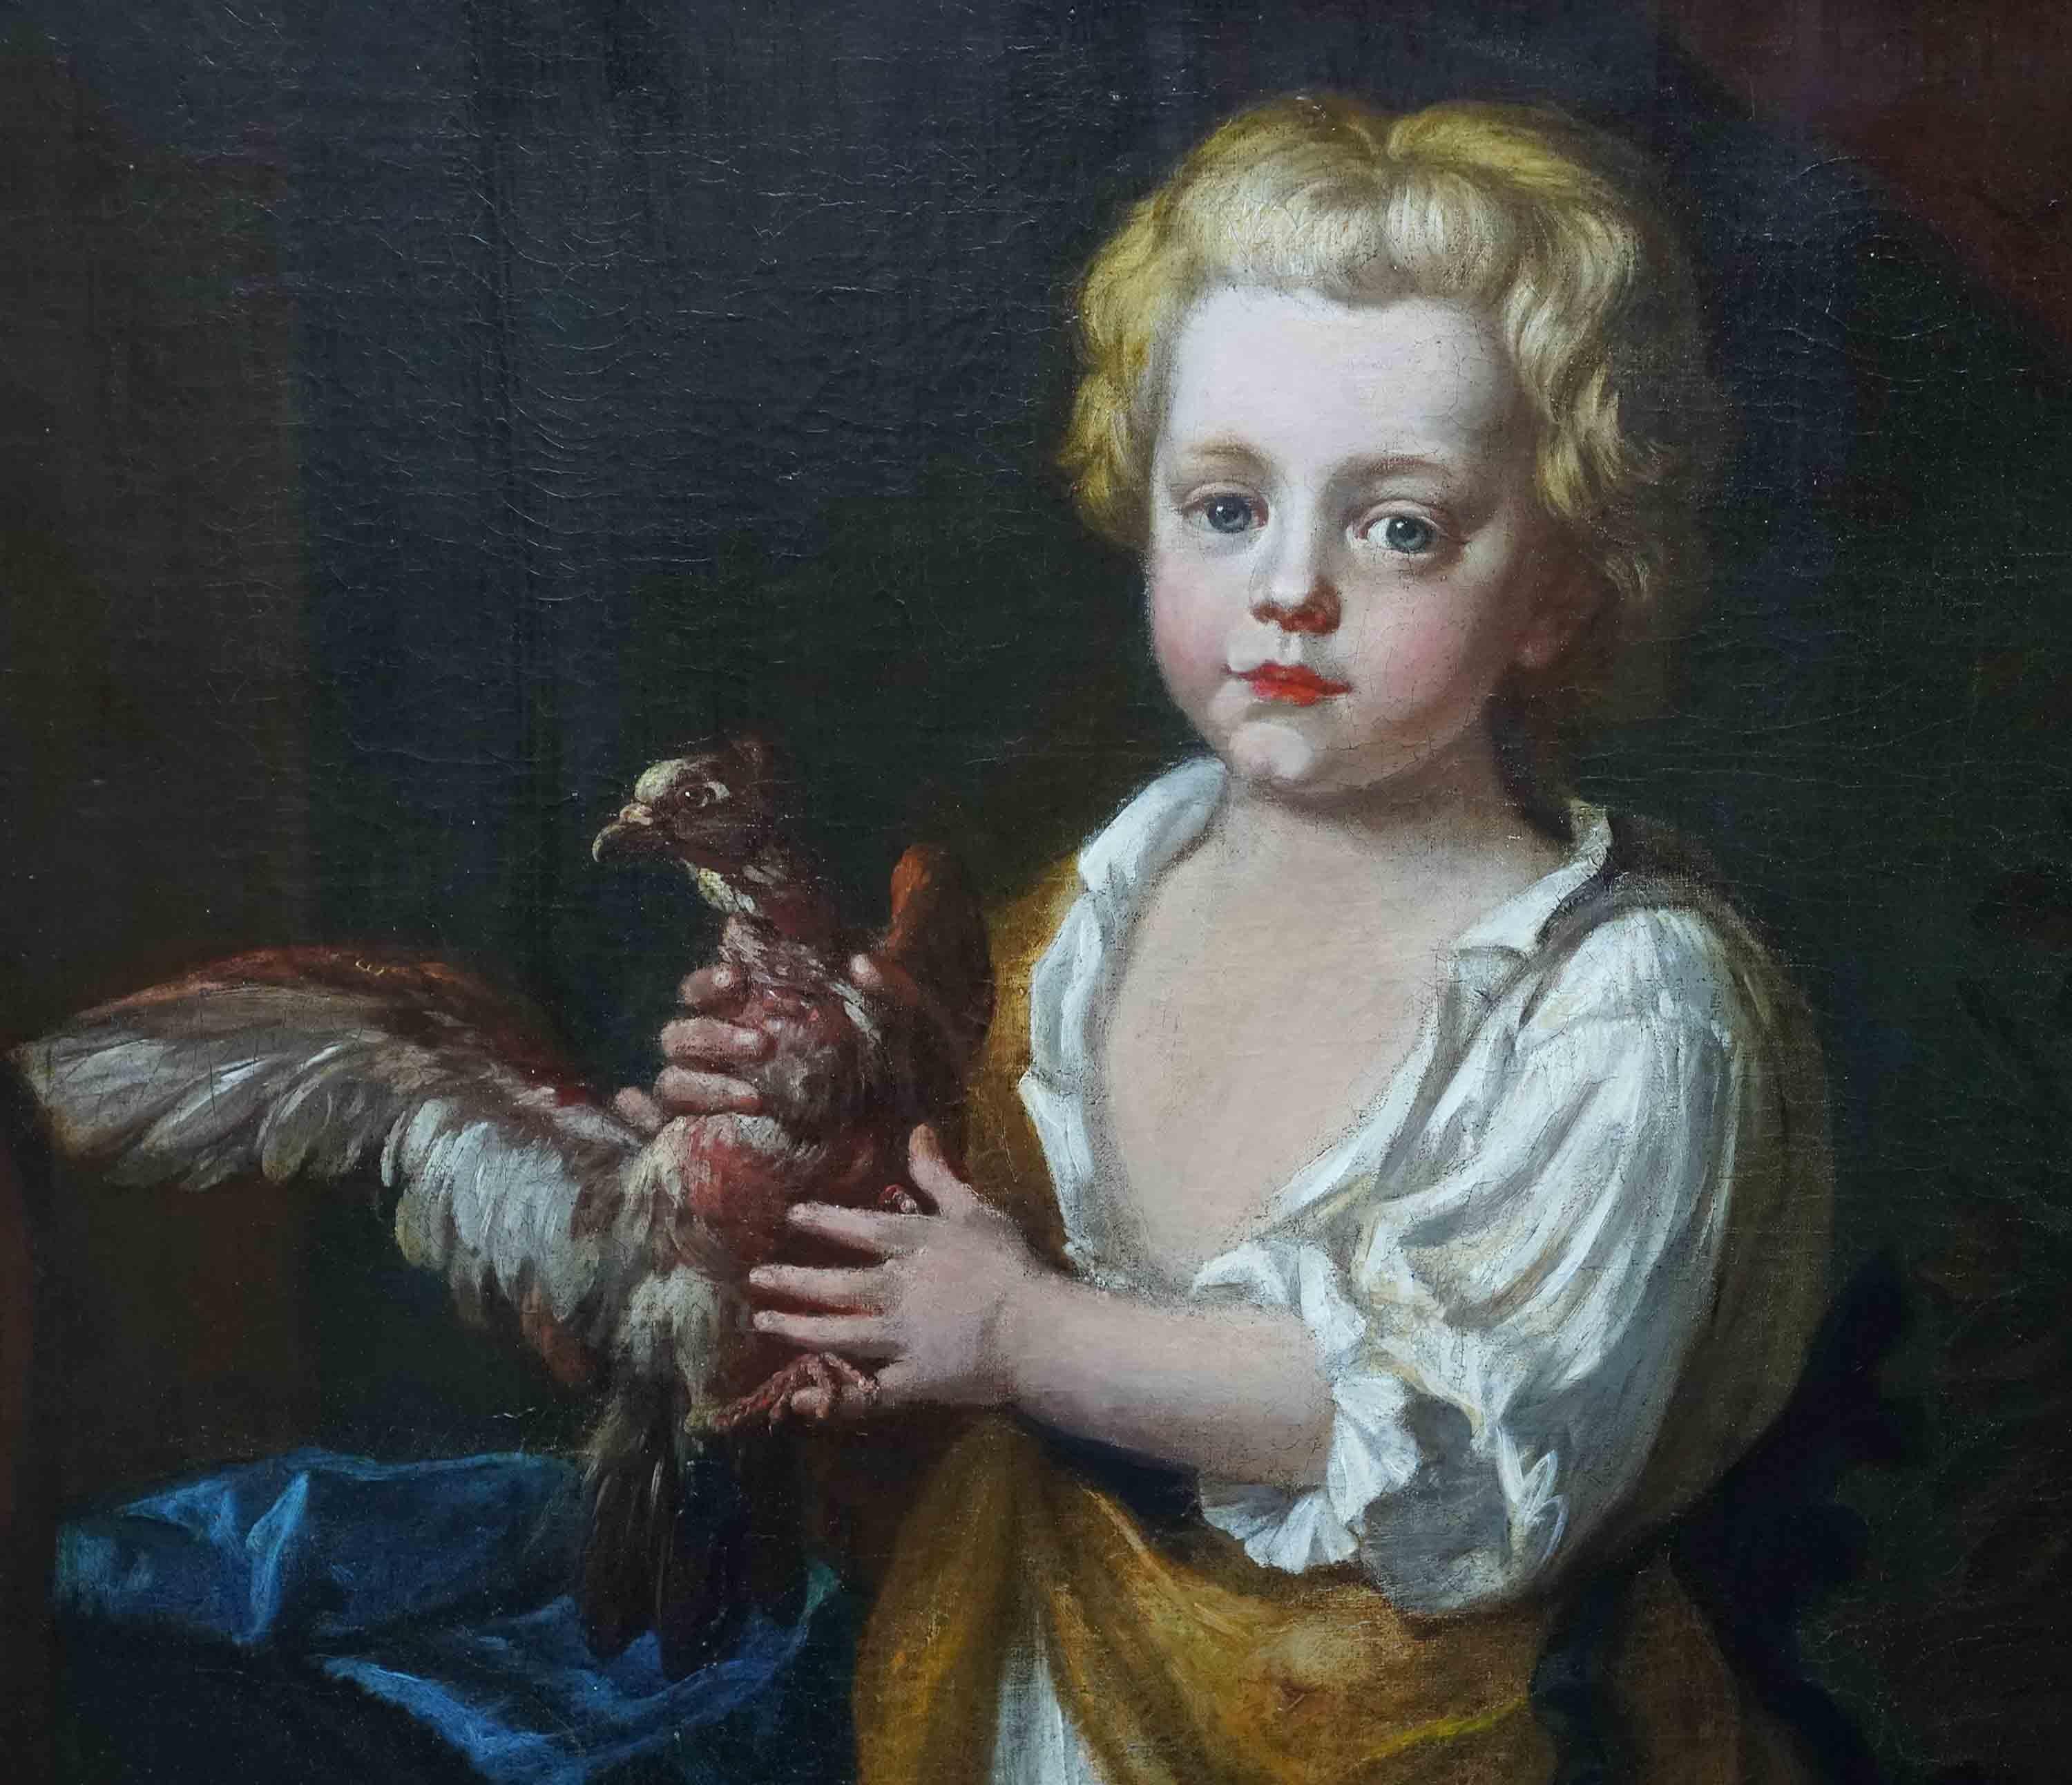 Portrait of a Boy with Bird - British 17th century art Old Master oil painting For Sale 1